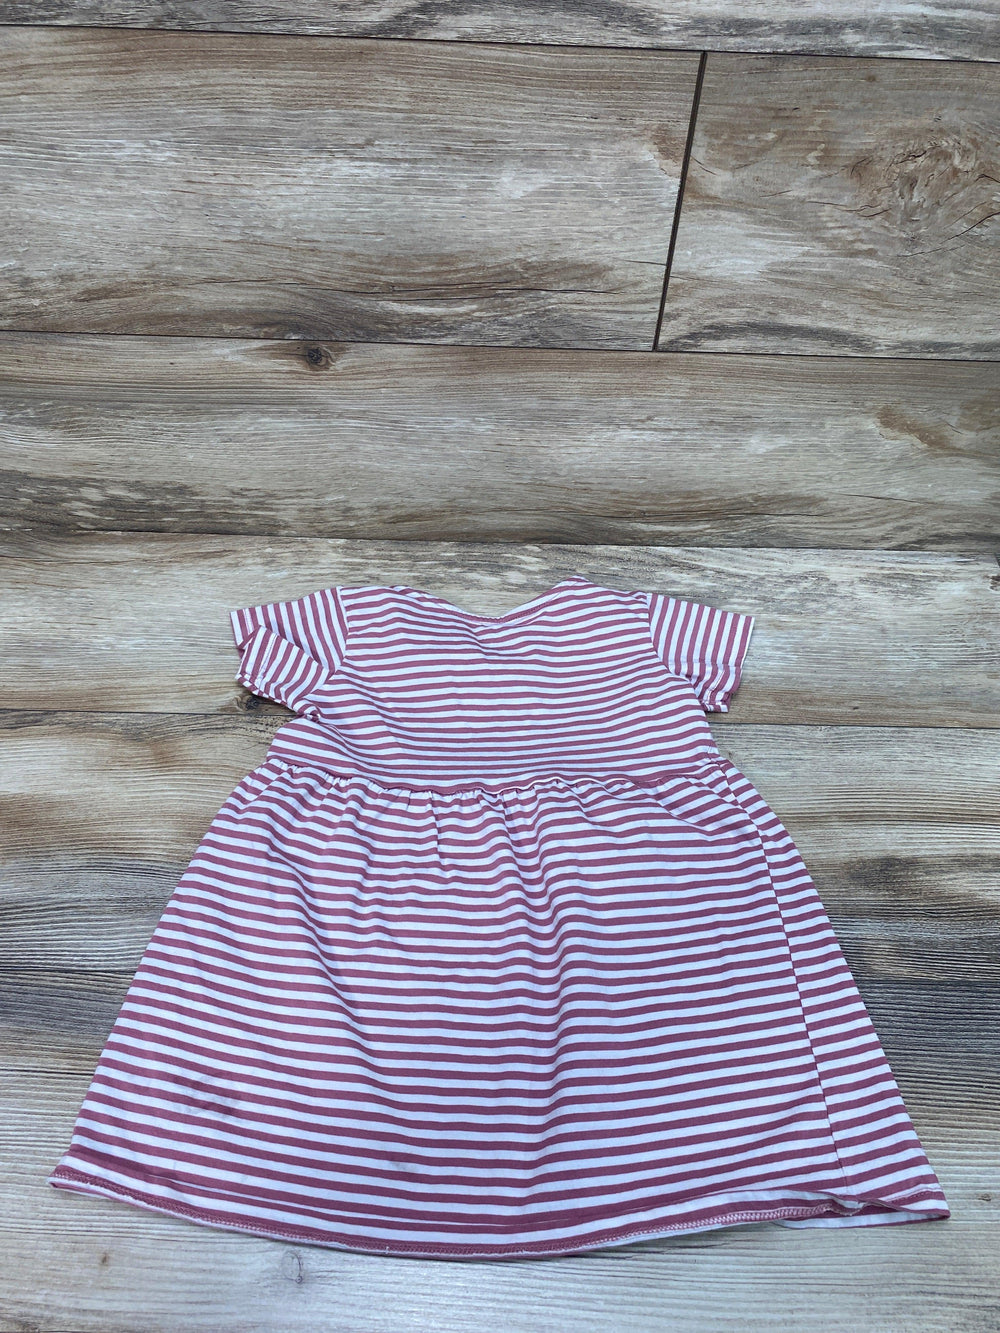 H&M Pink Striped Dress sz 3-4T - Me 'n Mommy To Be